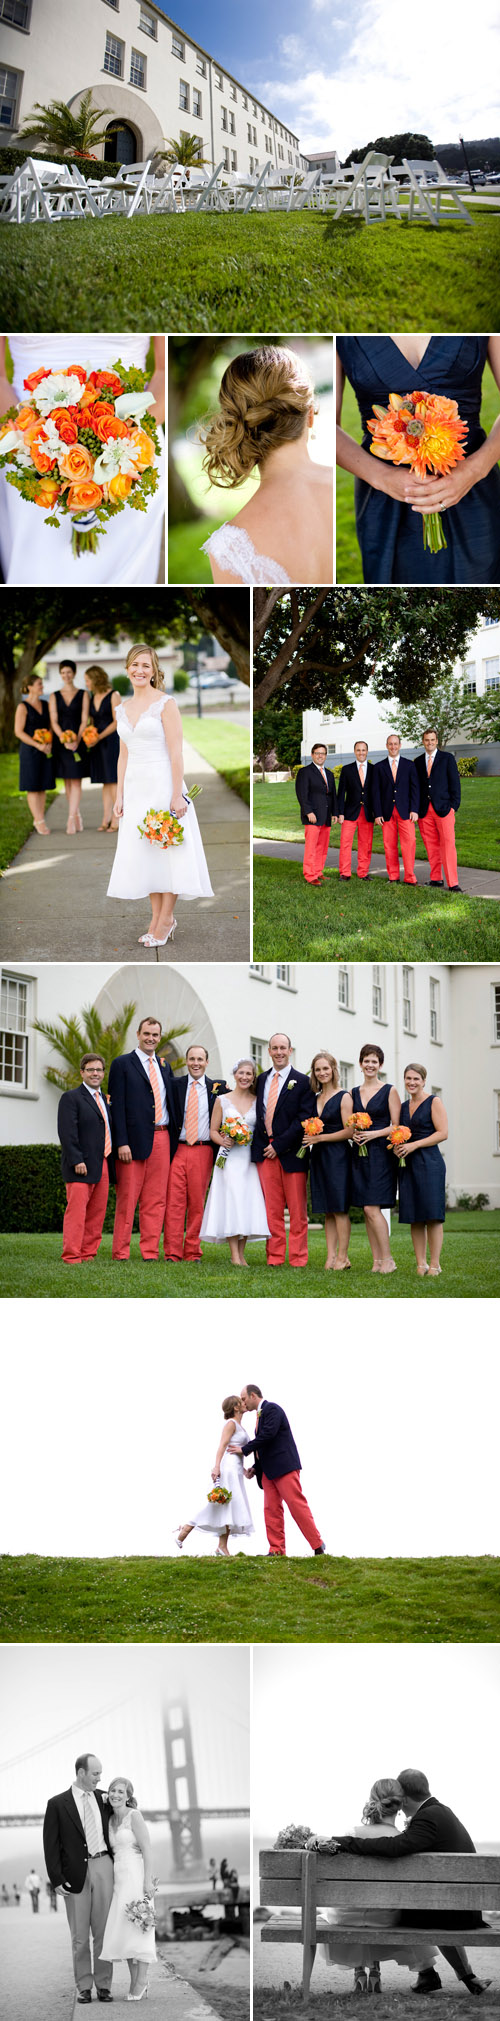 fun and preppy wedding with a croquet garden party in San Francisco's Presidio, photos by Gertrude and Mabel Photography